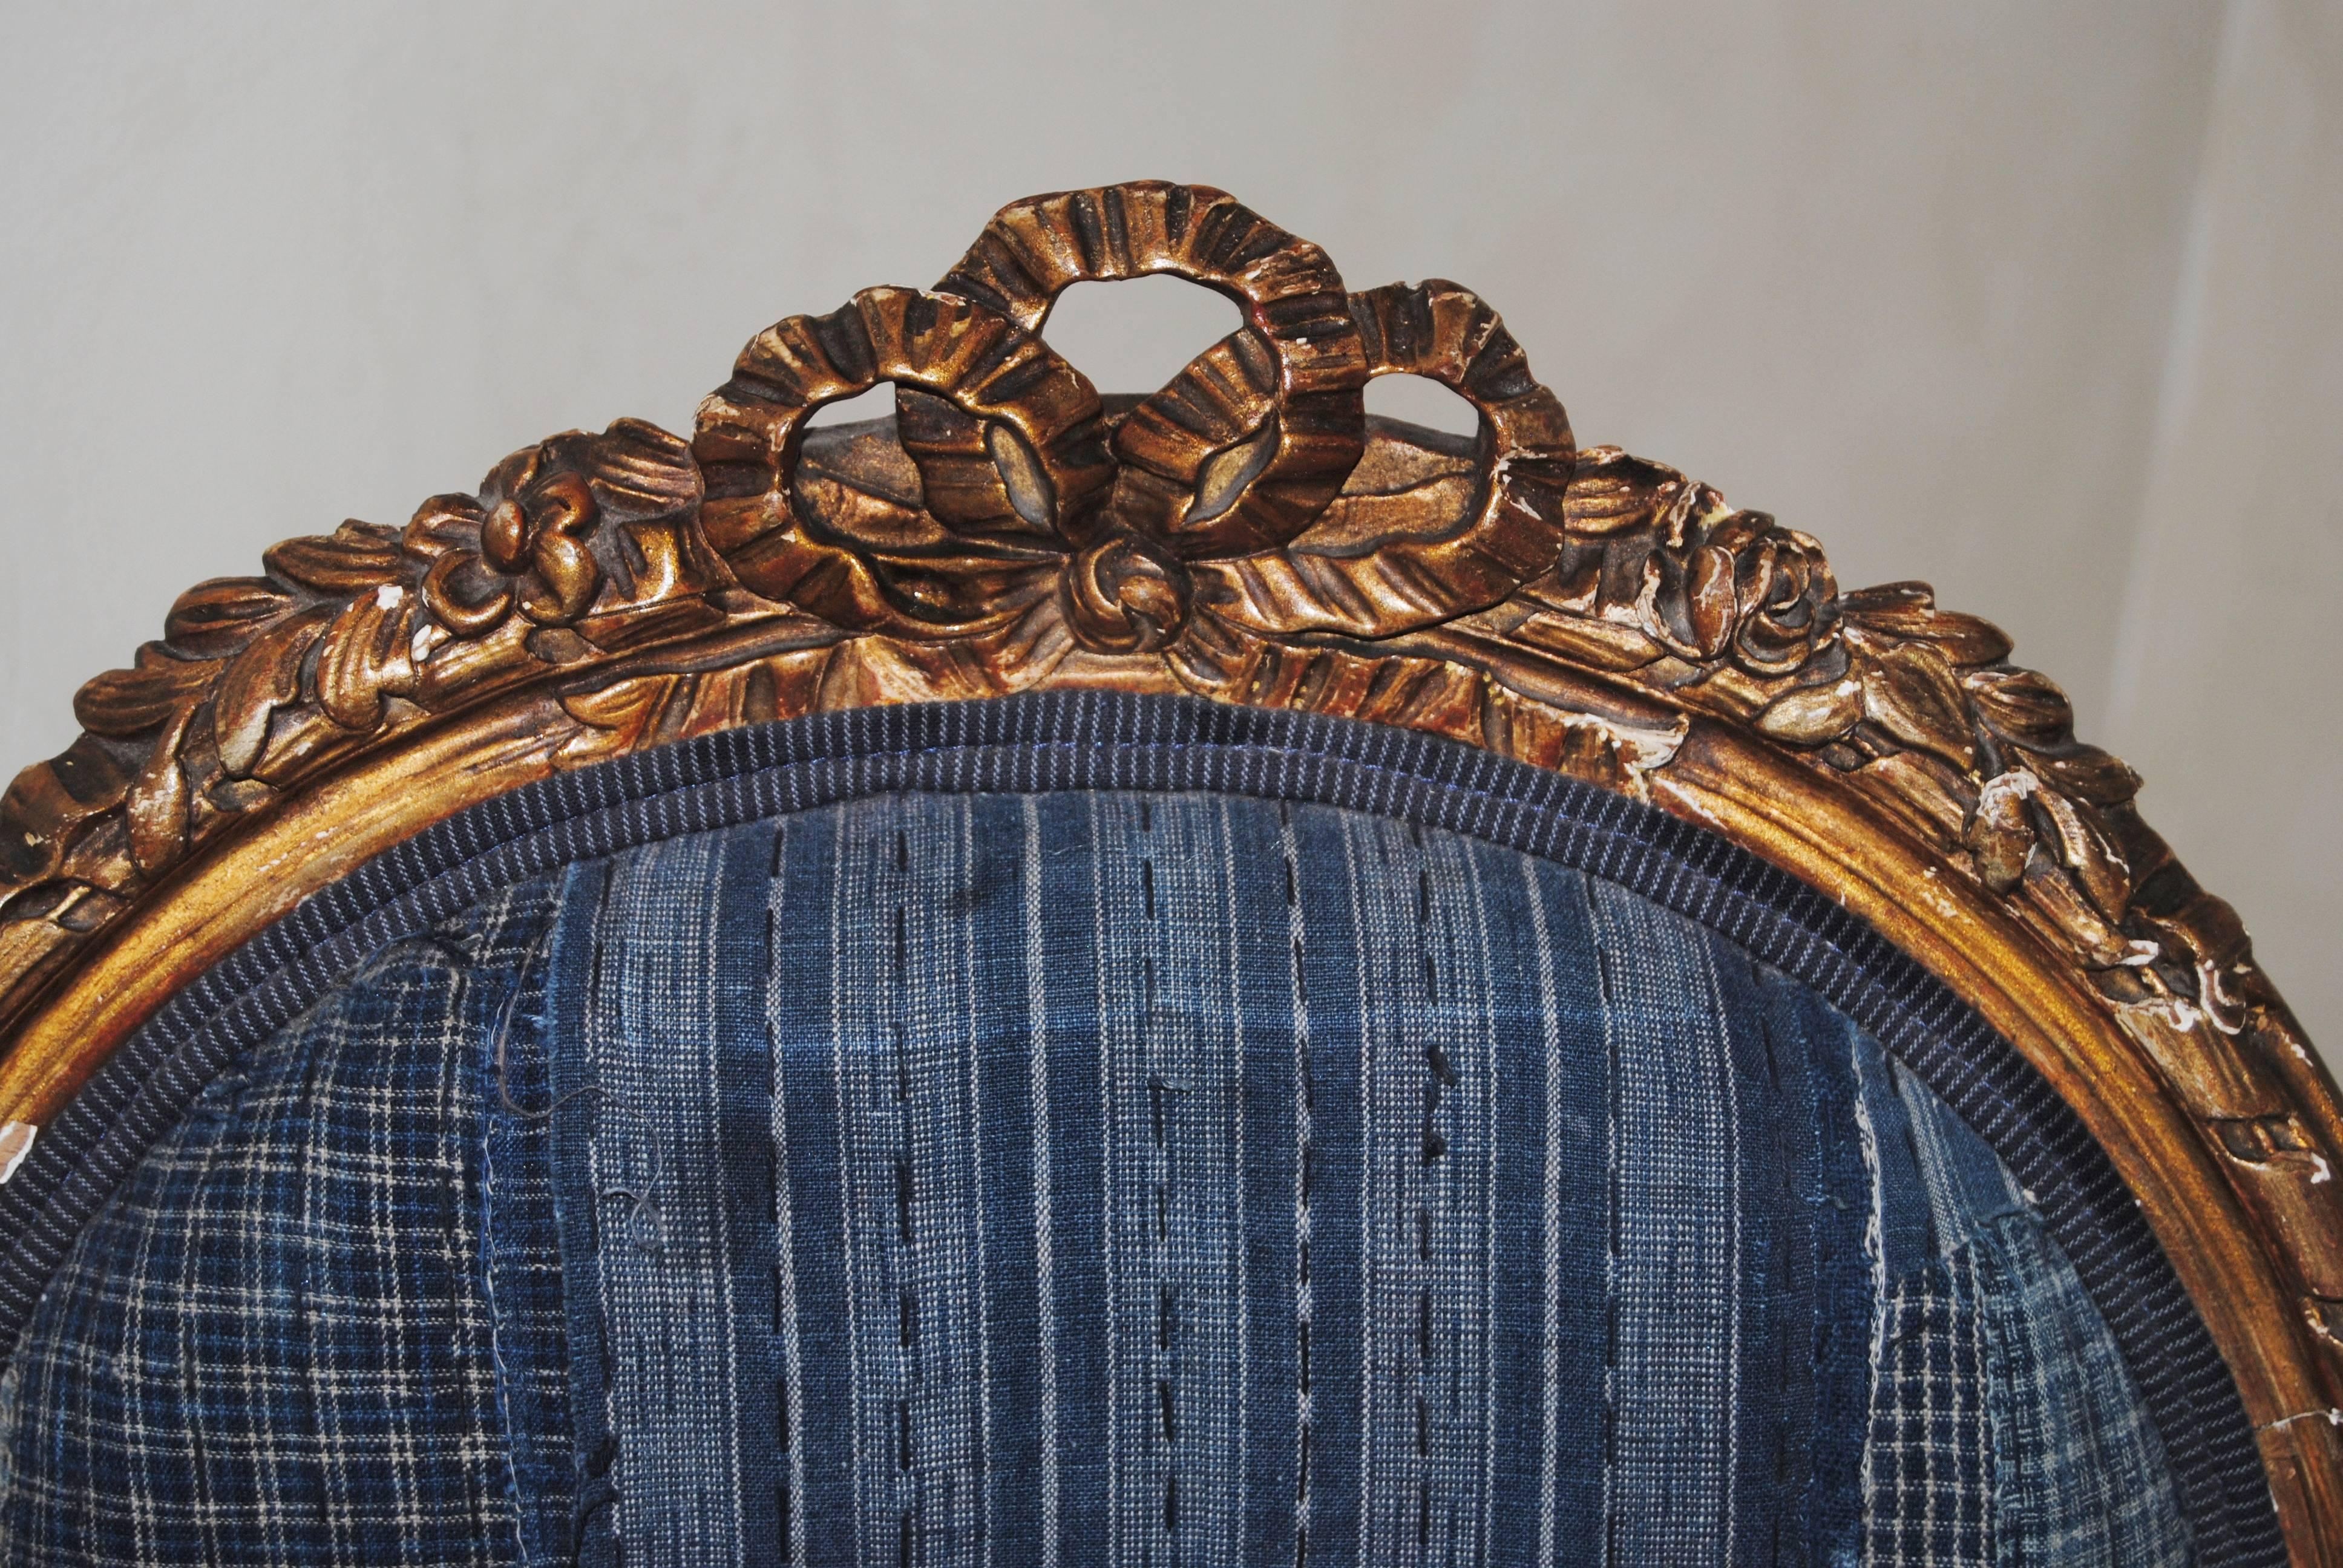 This antique French gilt chair, from late 1800s, was originally upholstered in a fine Aubusson floral textile. The chair has been reupholstered in an antique Japanese indigo boro textile from the late 1800s. The boro is stitched with multiple scraps